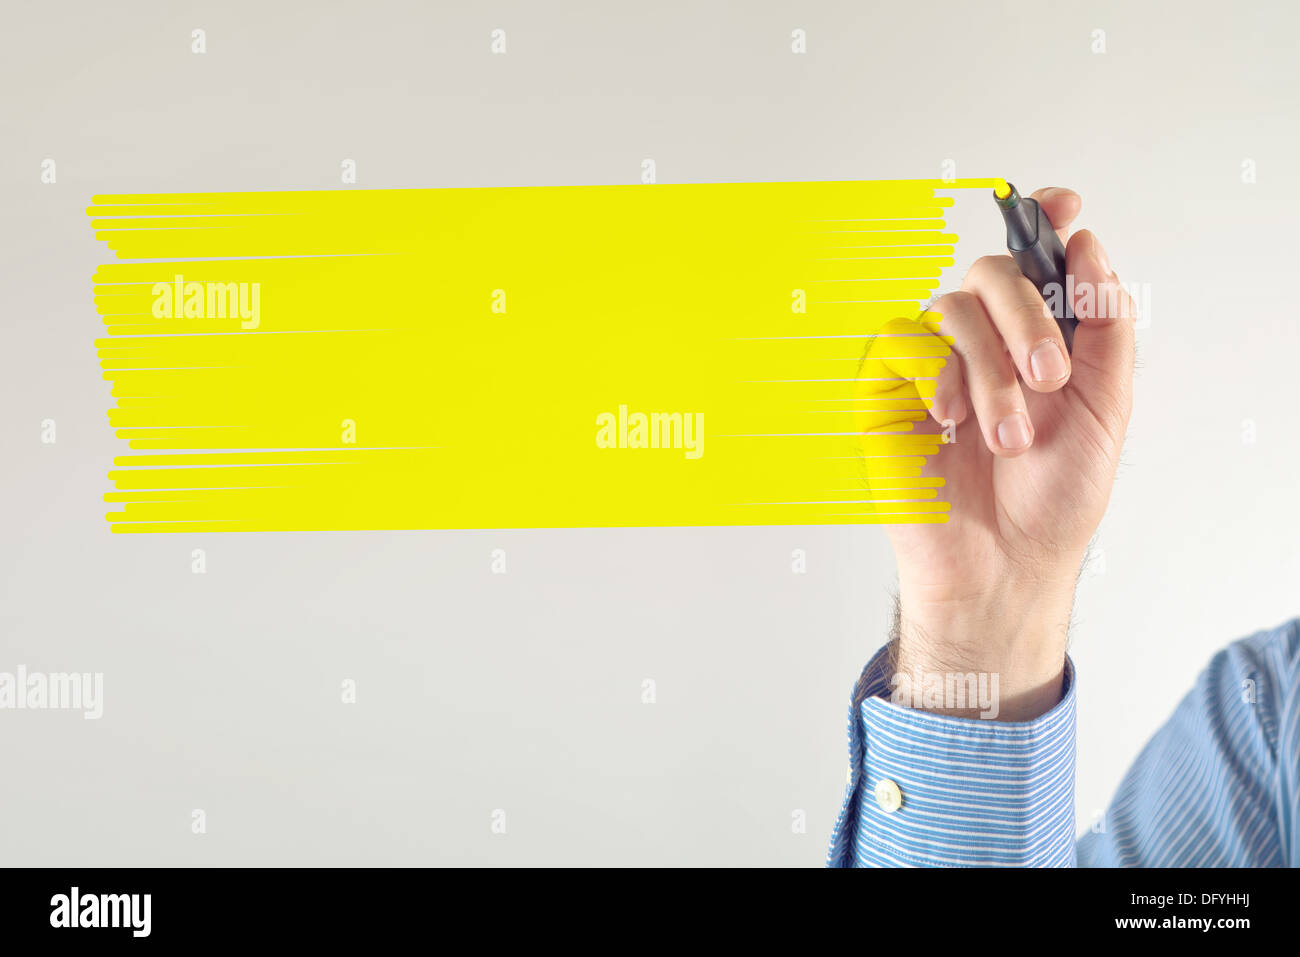 Businessman writing note with yellow marker pen. Copy space for your message. Stock Photo